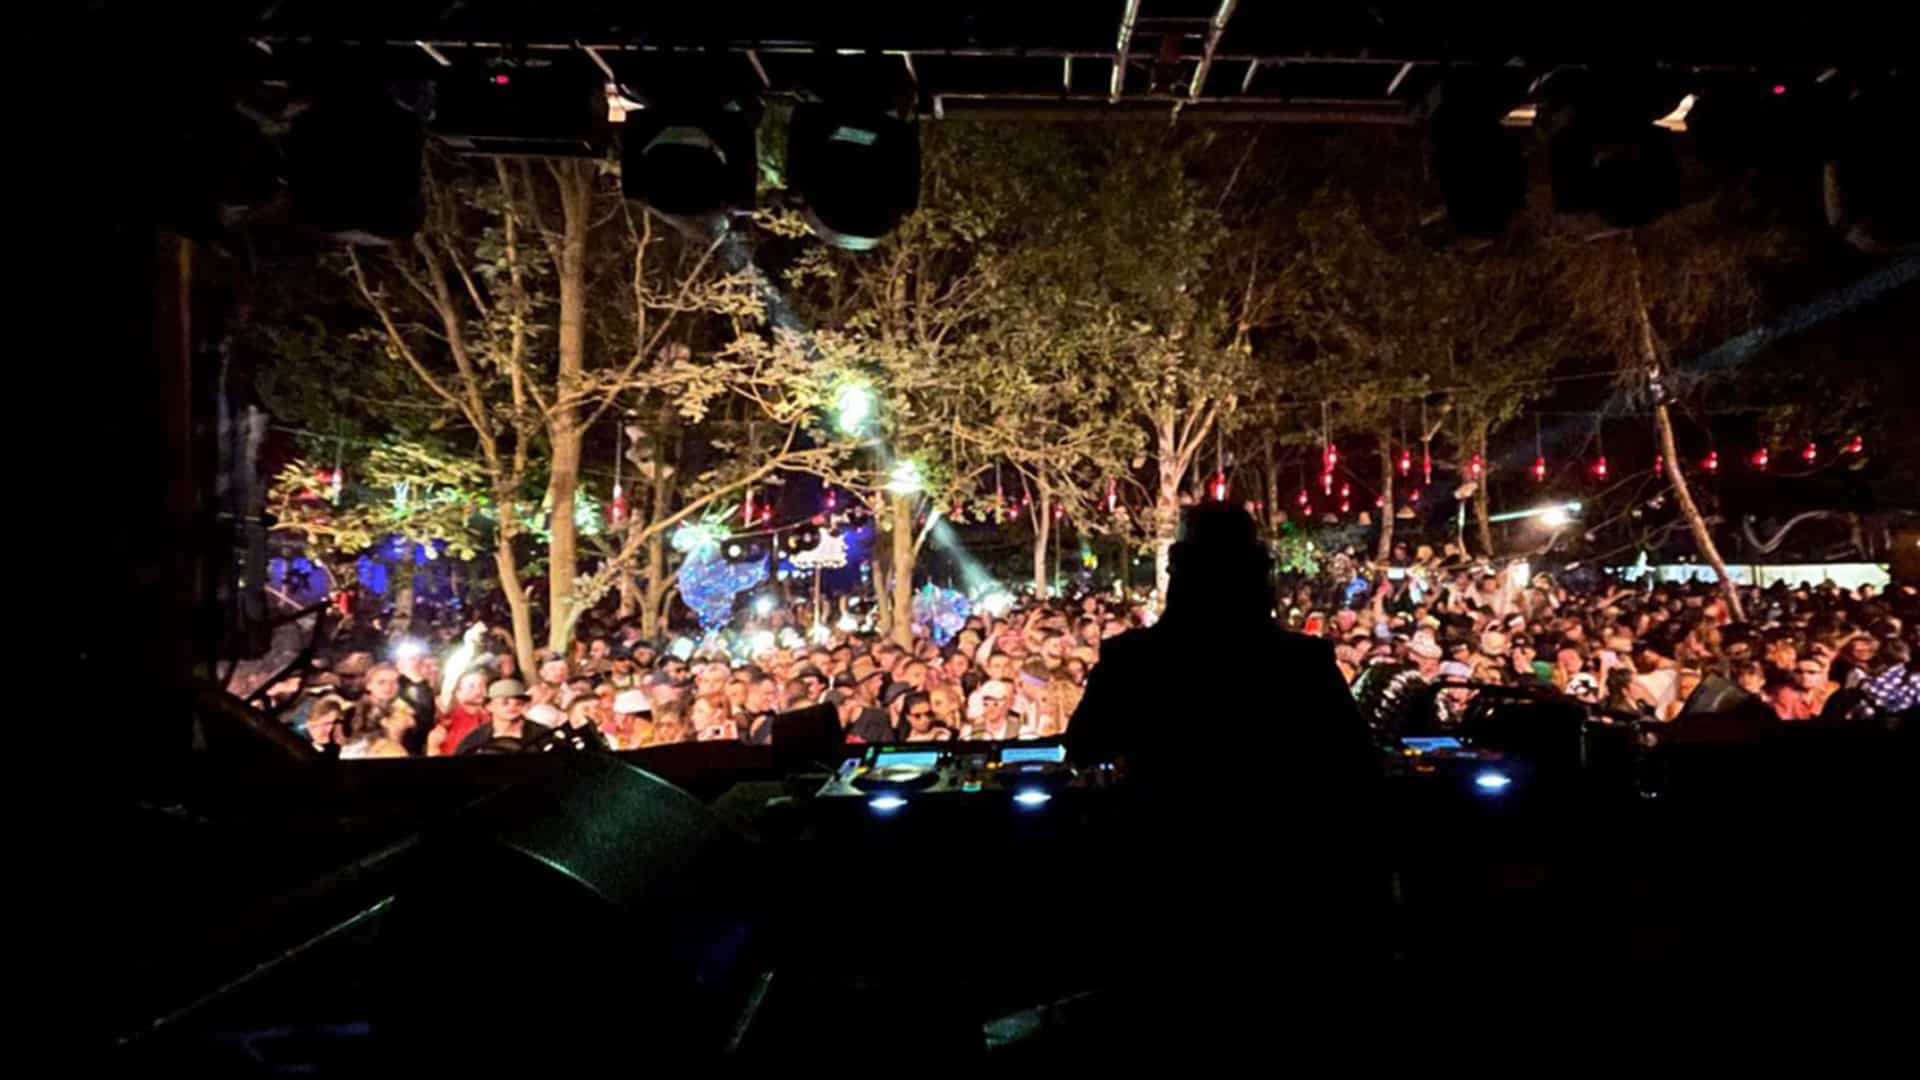 Thousands party in the woods at Lost Village festival near Lincoln